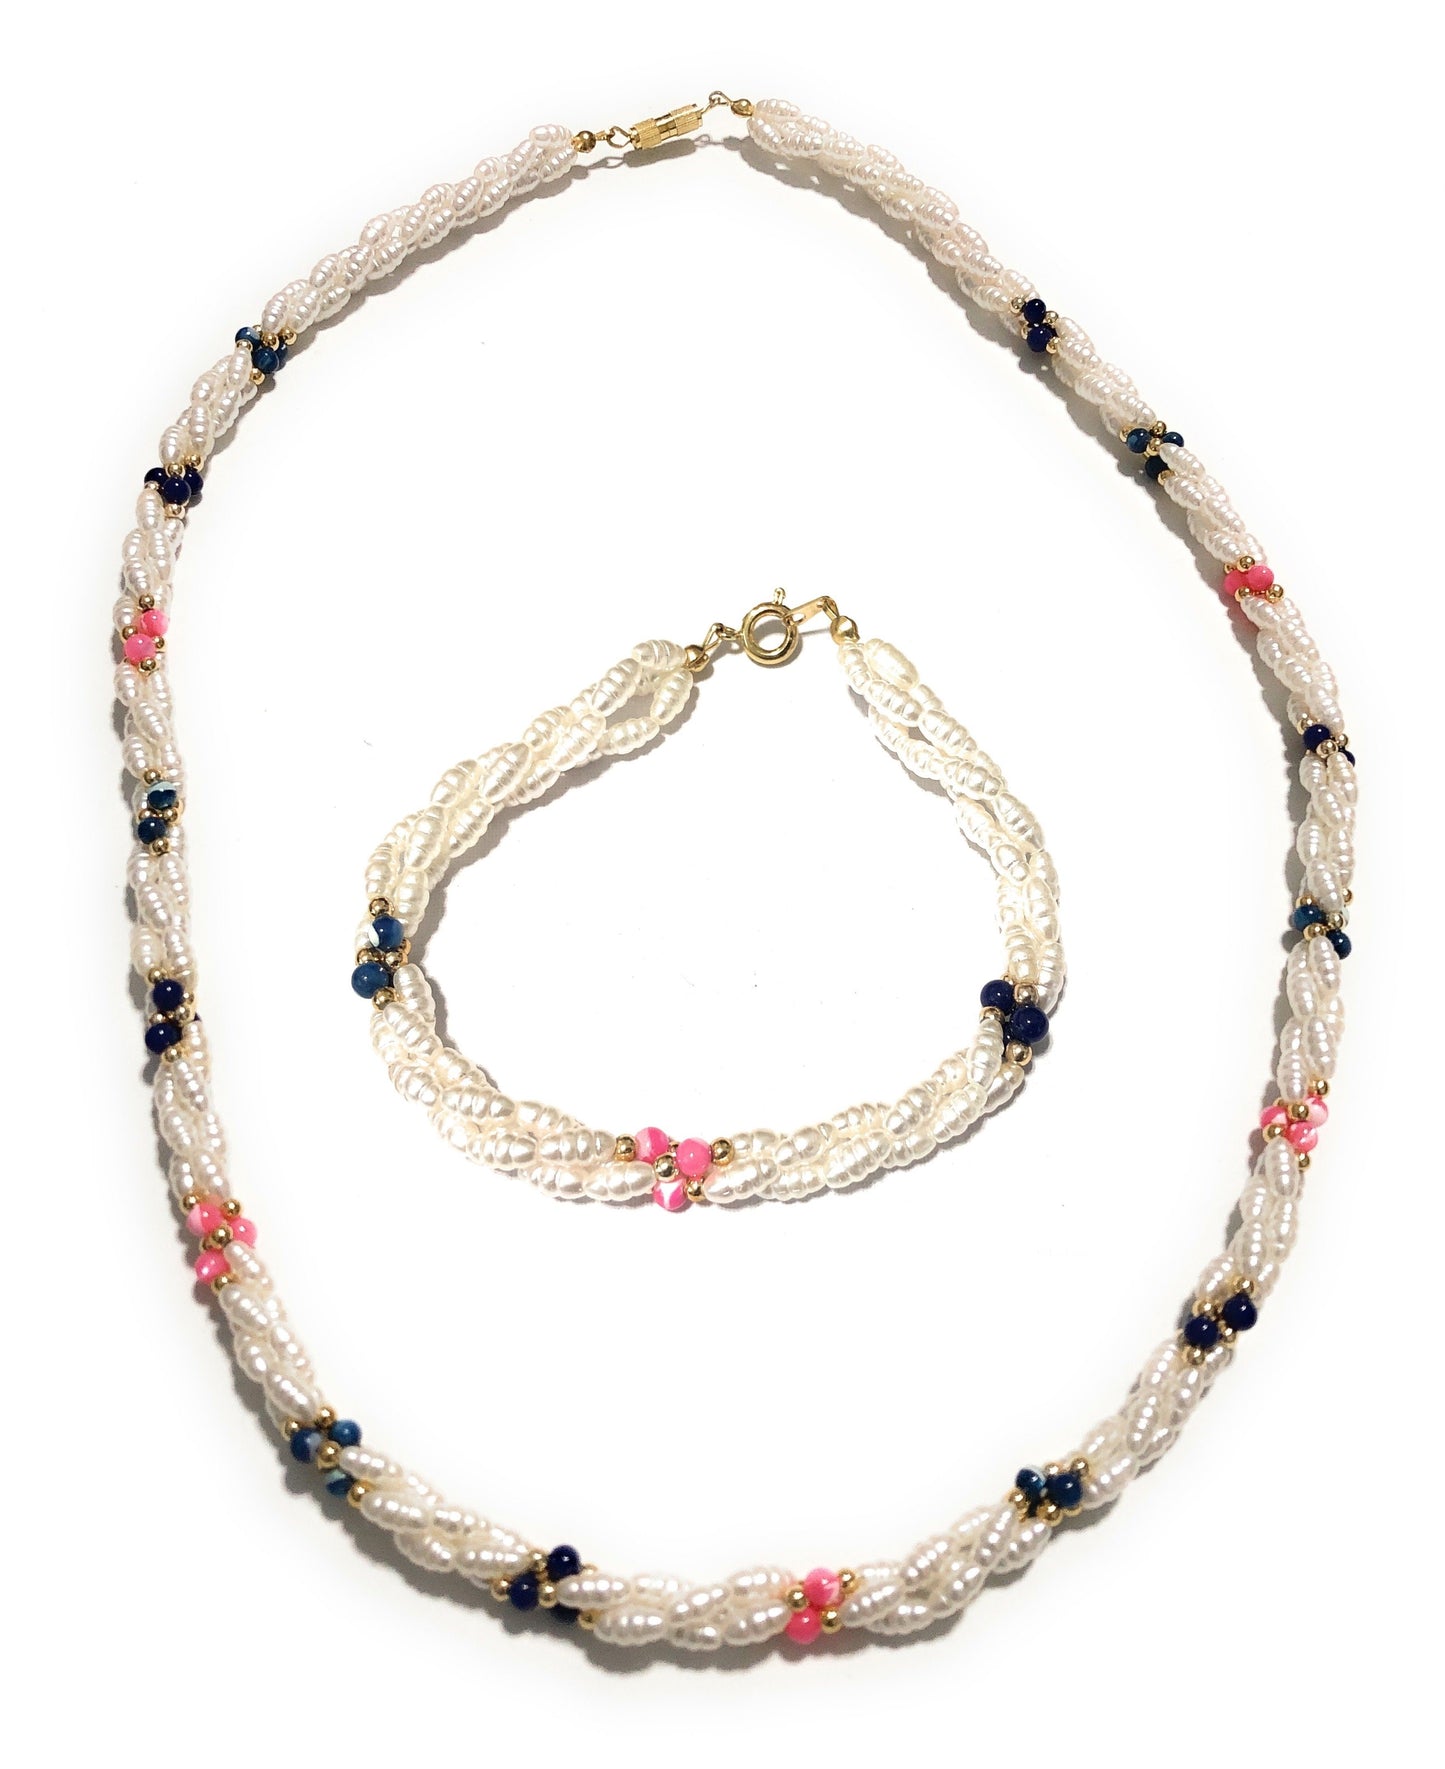 Real Pearl Statement Necklace & Bracelet